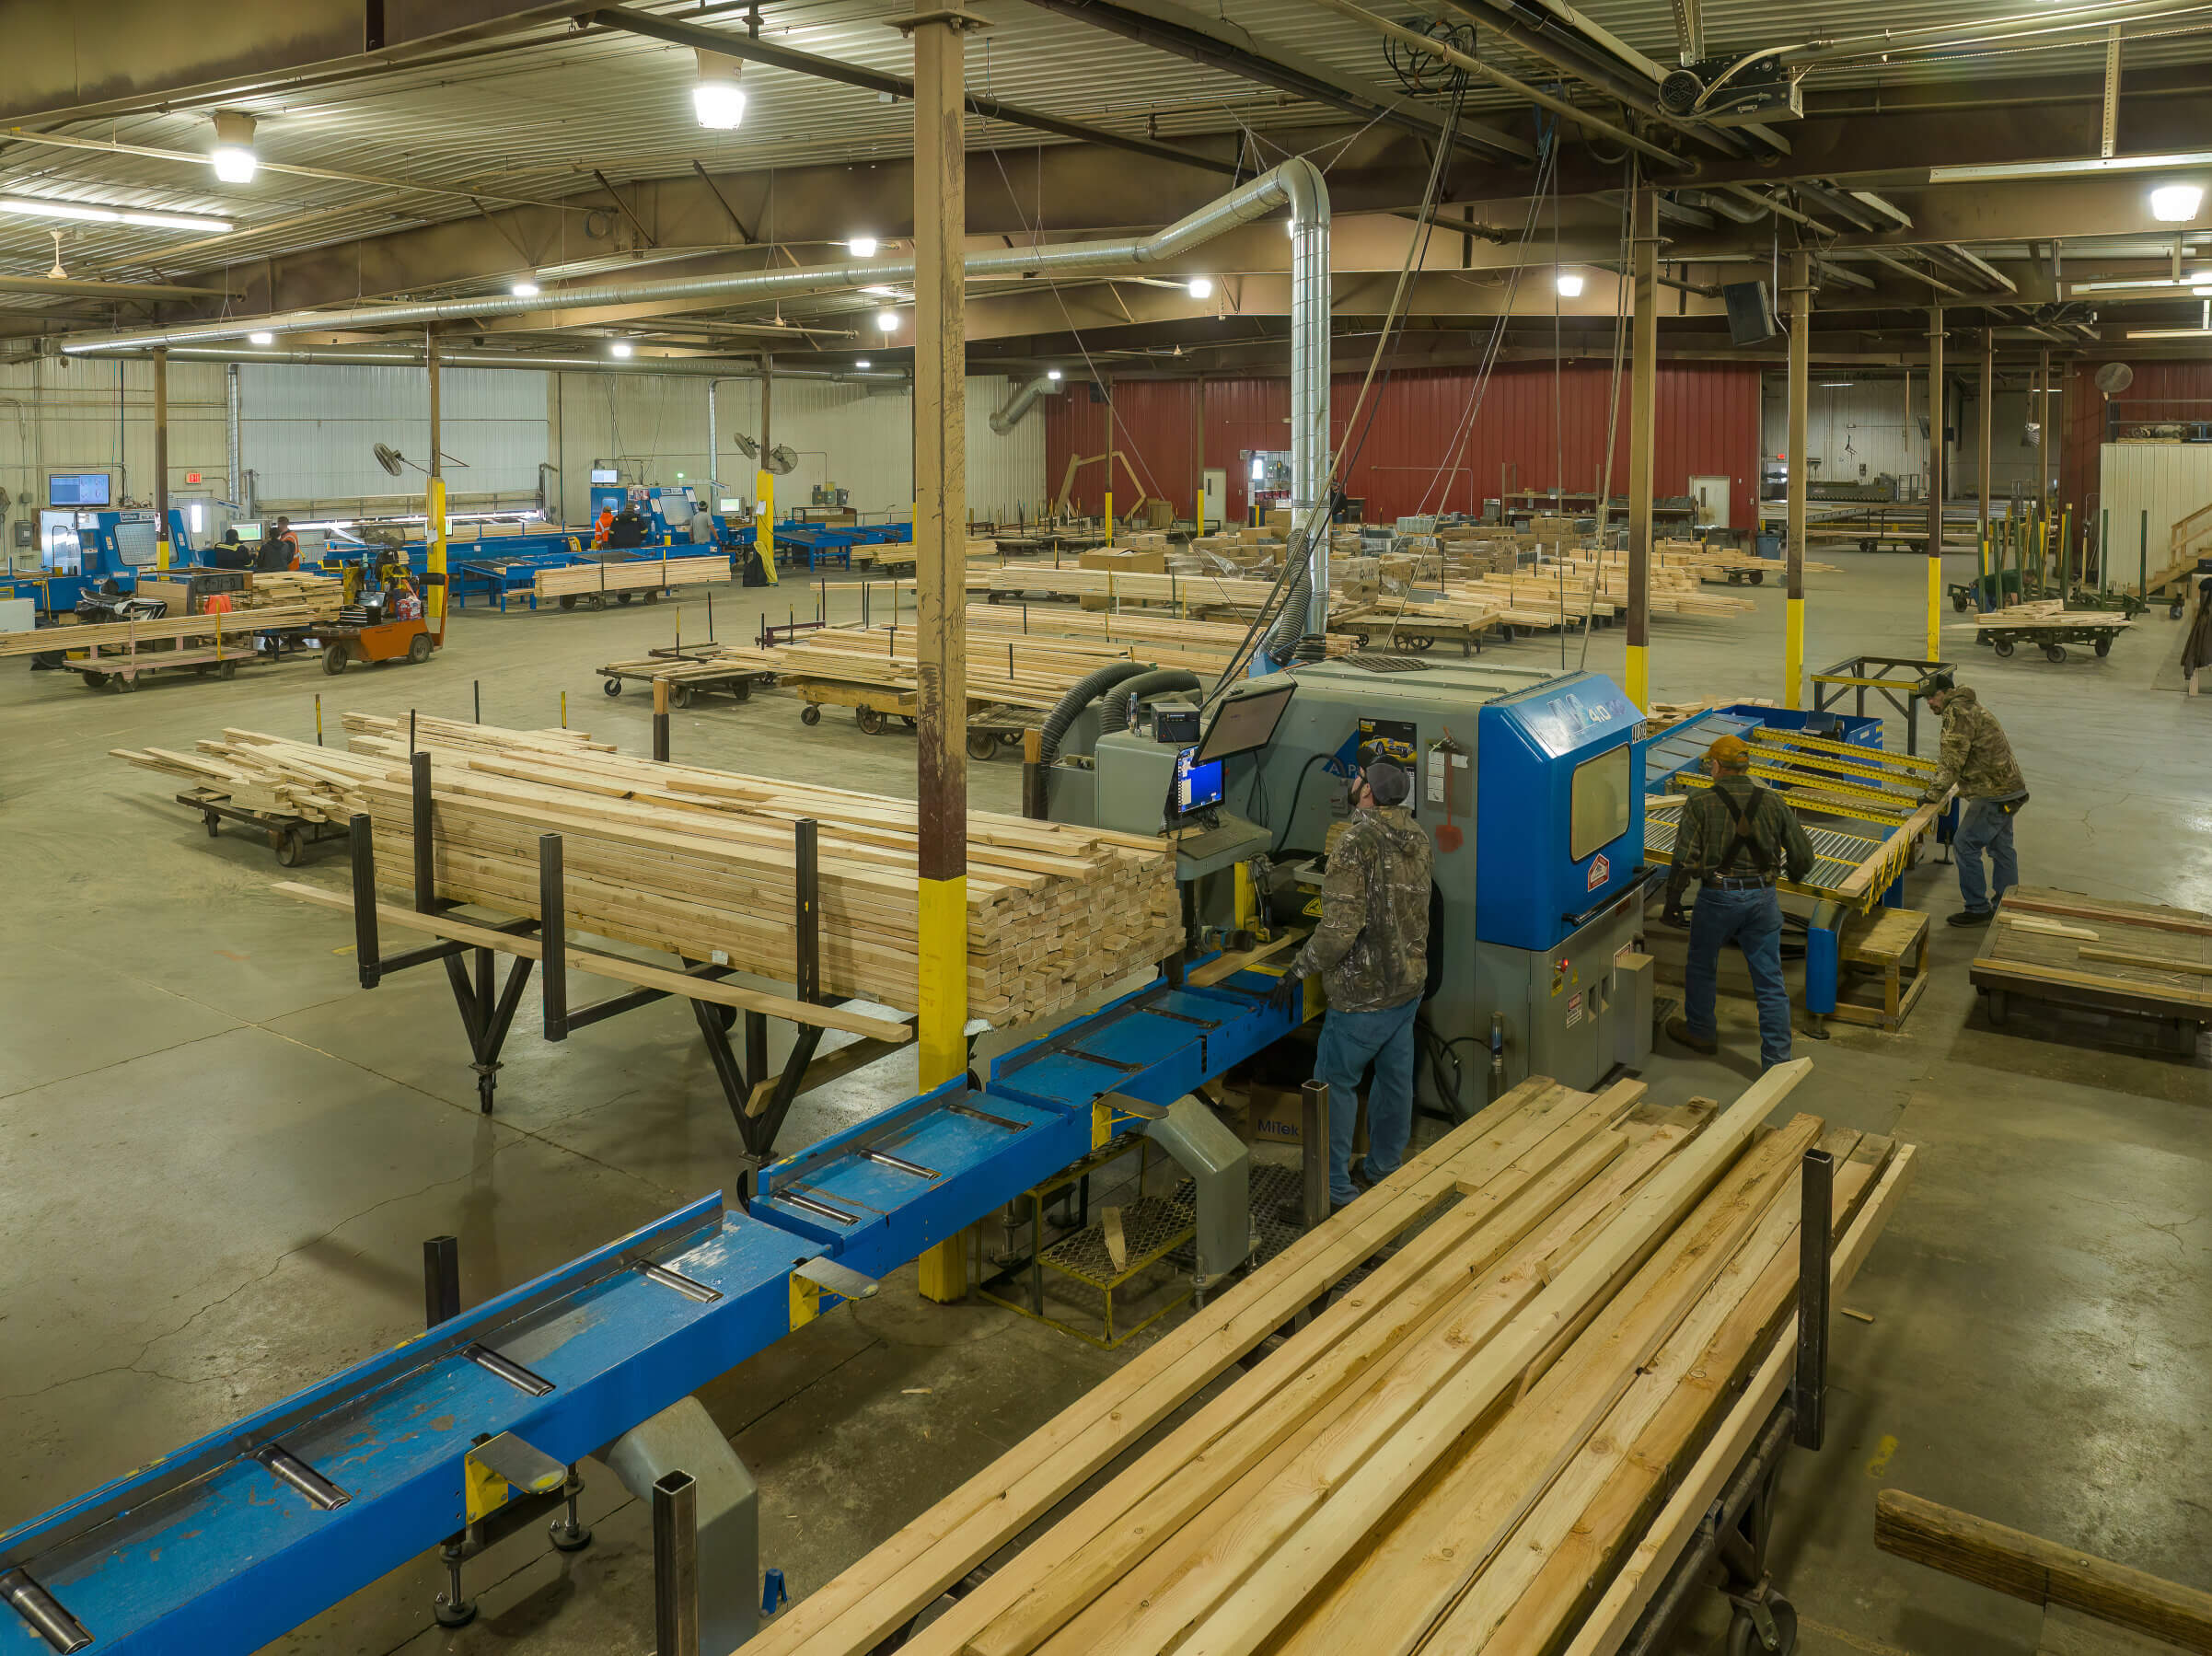 Lumber waiting to be assembled into trusses